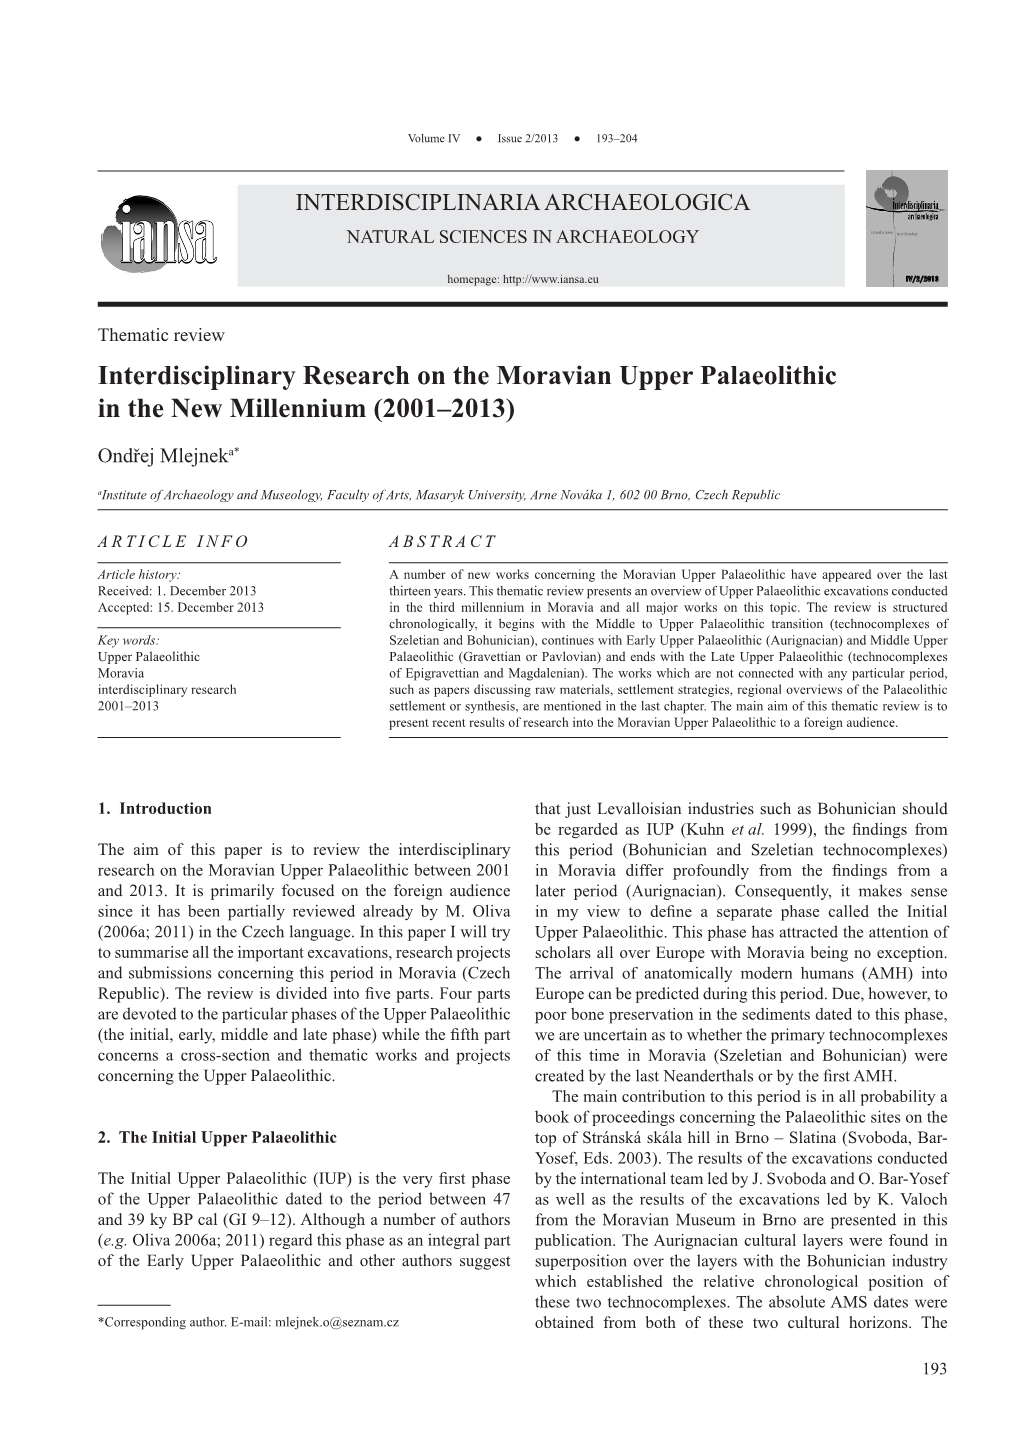 Interdisciplinary Research on the Moravian Upper Palaeolithic in the New Millennium (2001–2013)